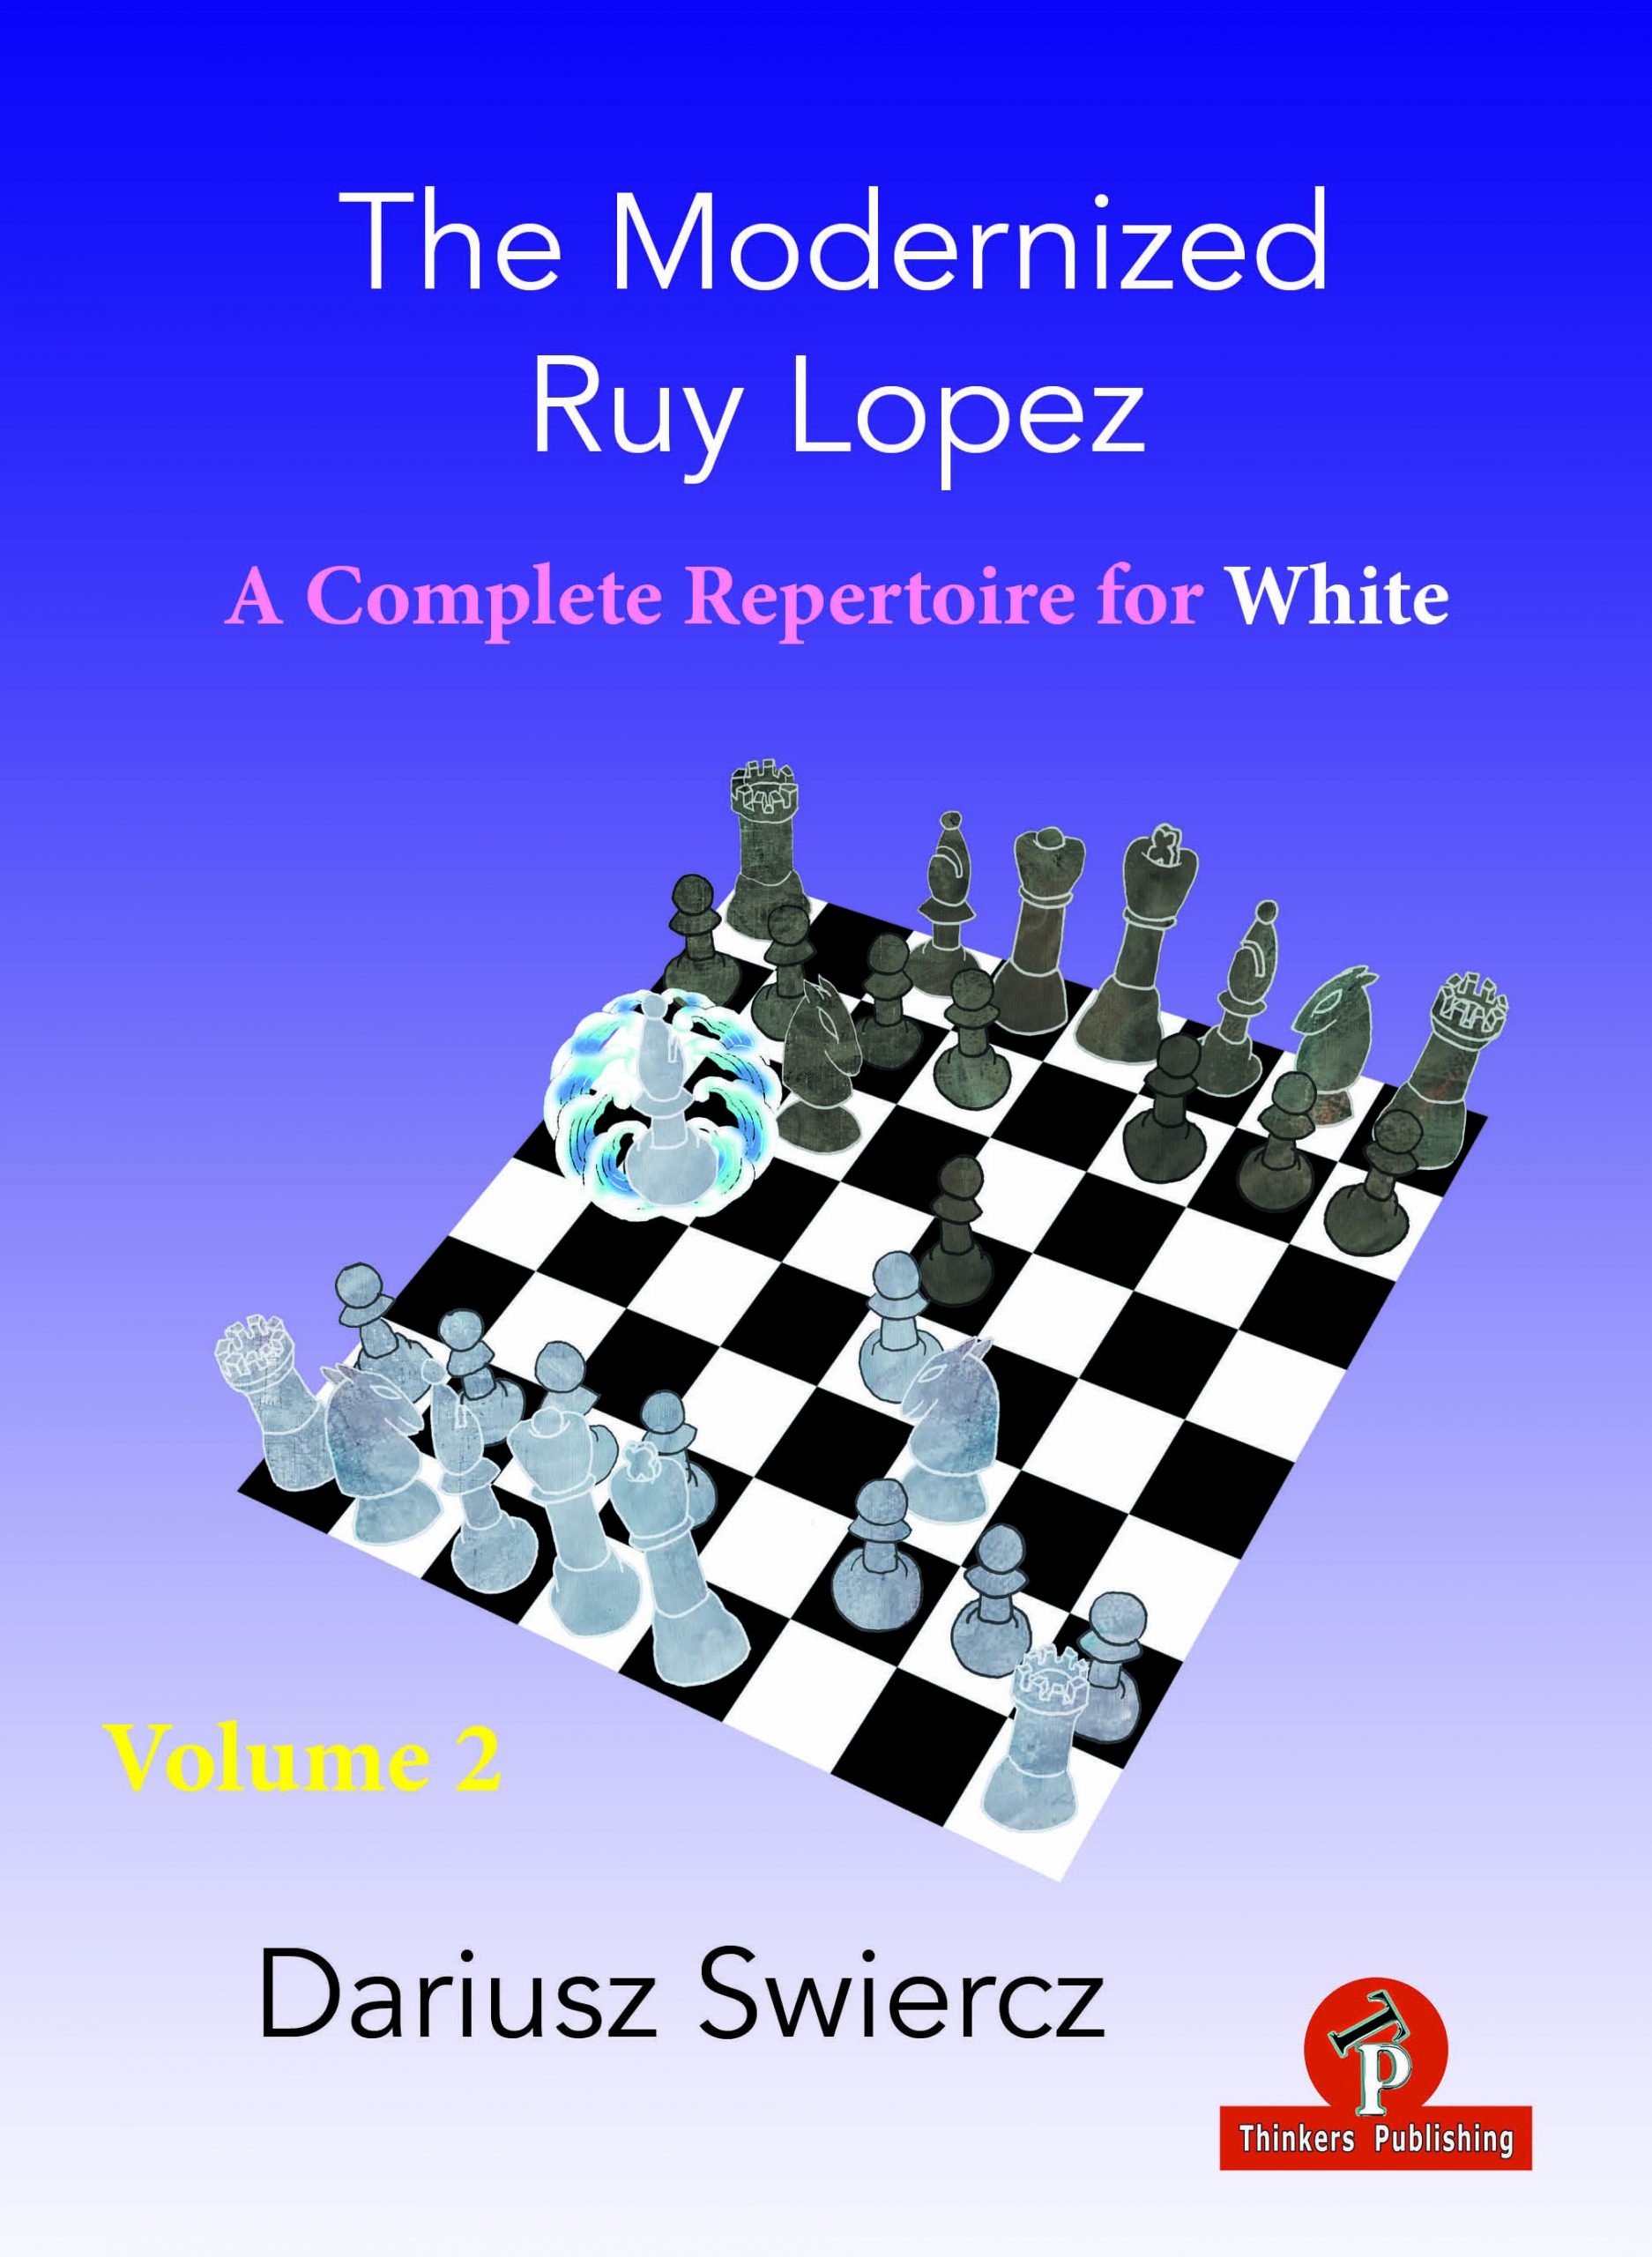 Ruy Lopez: The Spanish Exchange Variation - Chess Opening Software on DVD